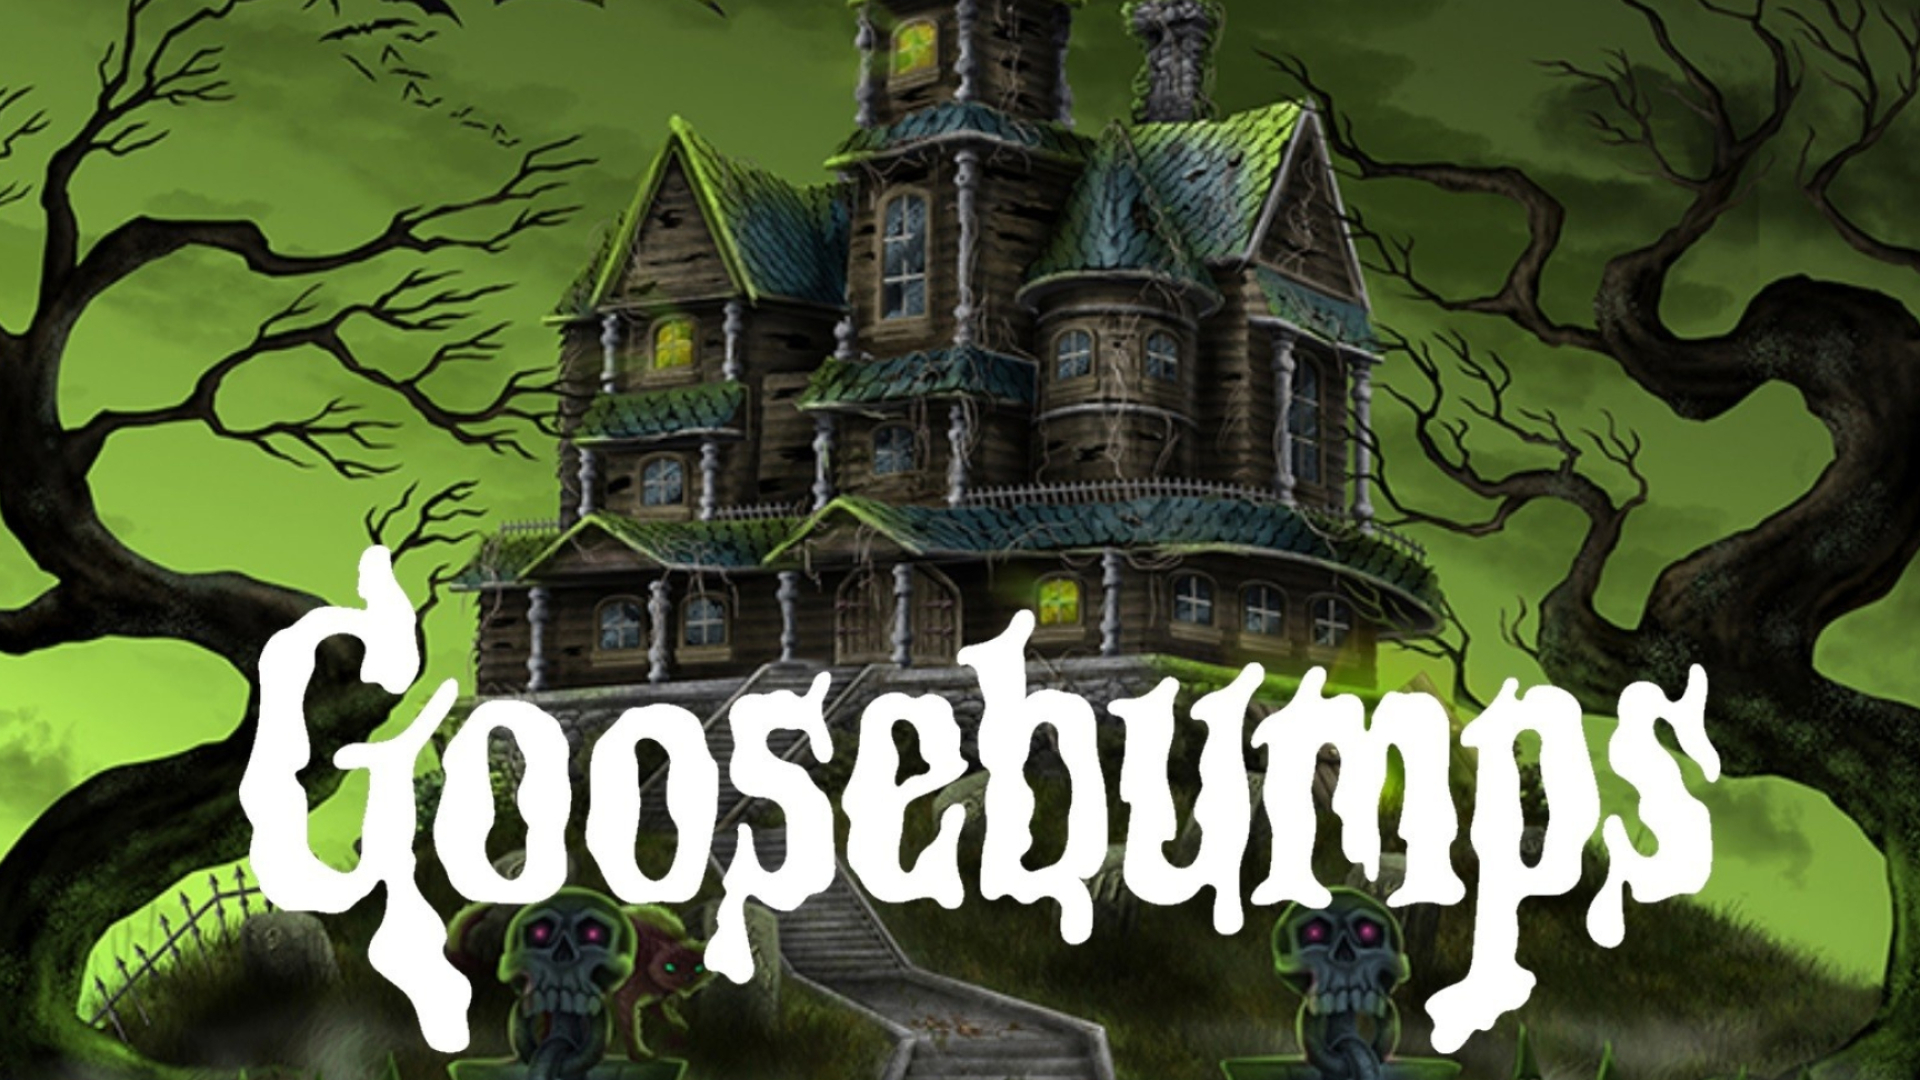 Goosebumps (TV Series): A horror series, A fictionalized town, A gloomy house. 1920x1080 Full HD Background.